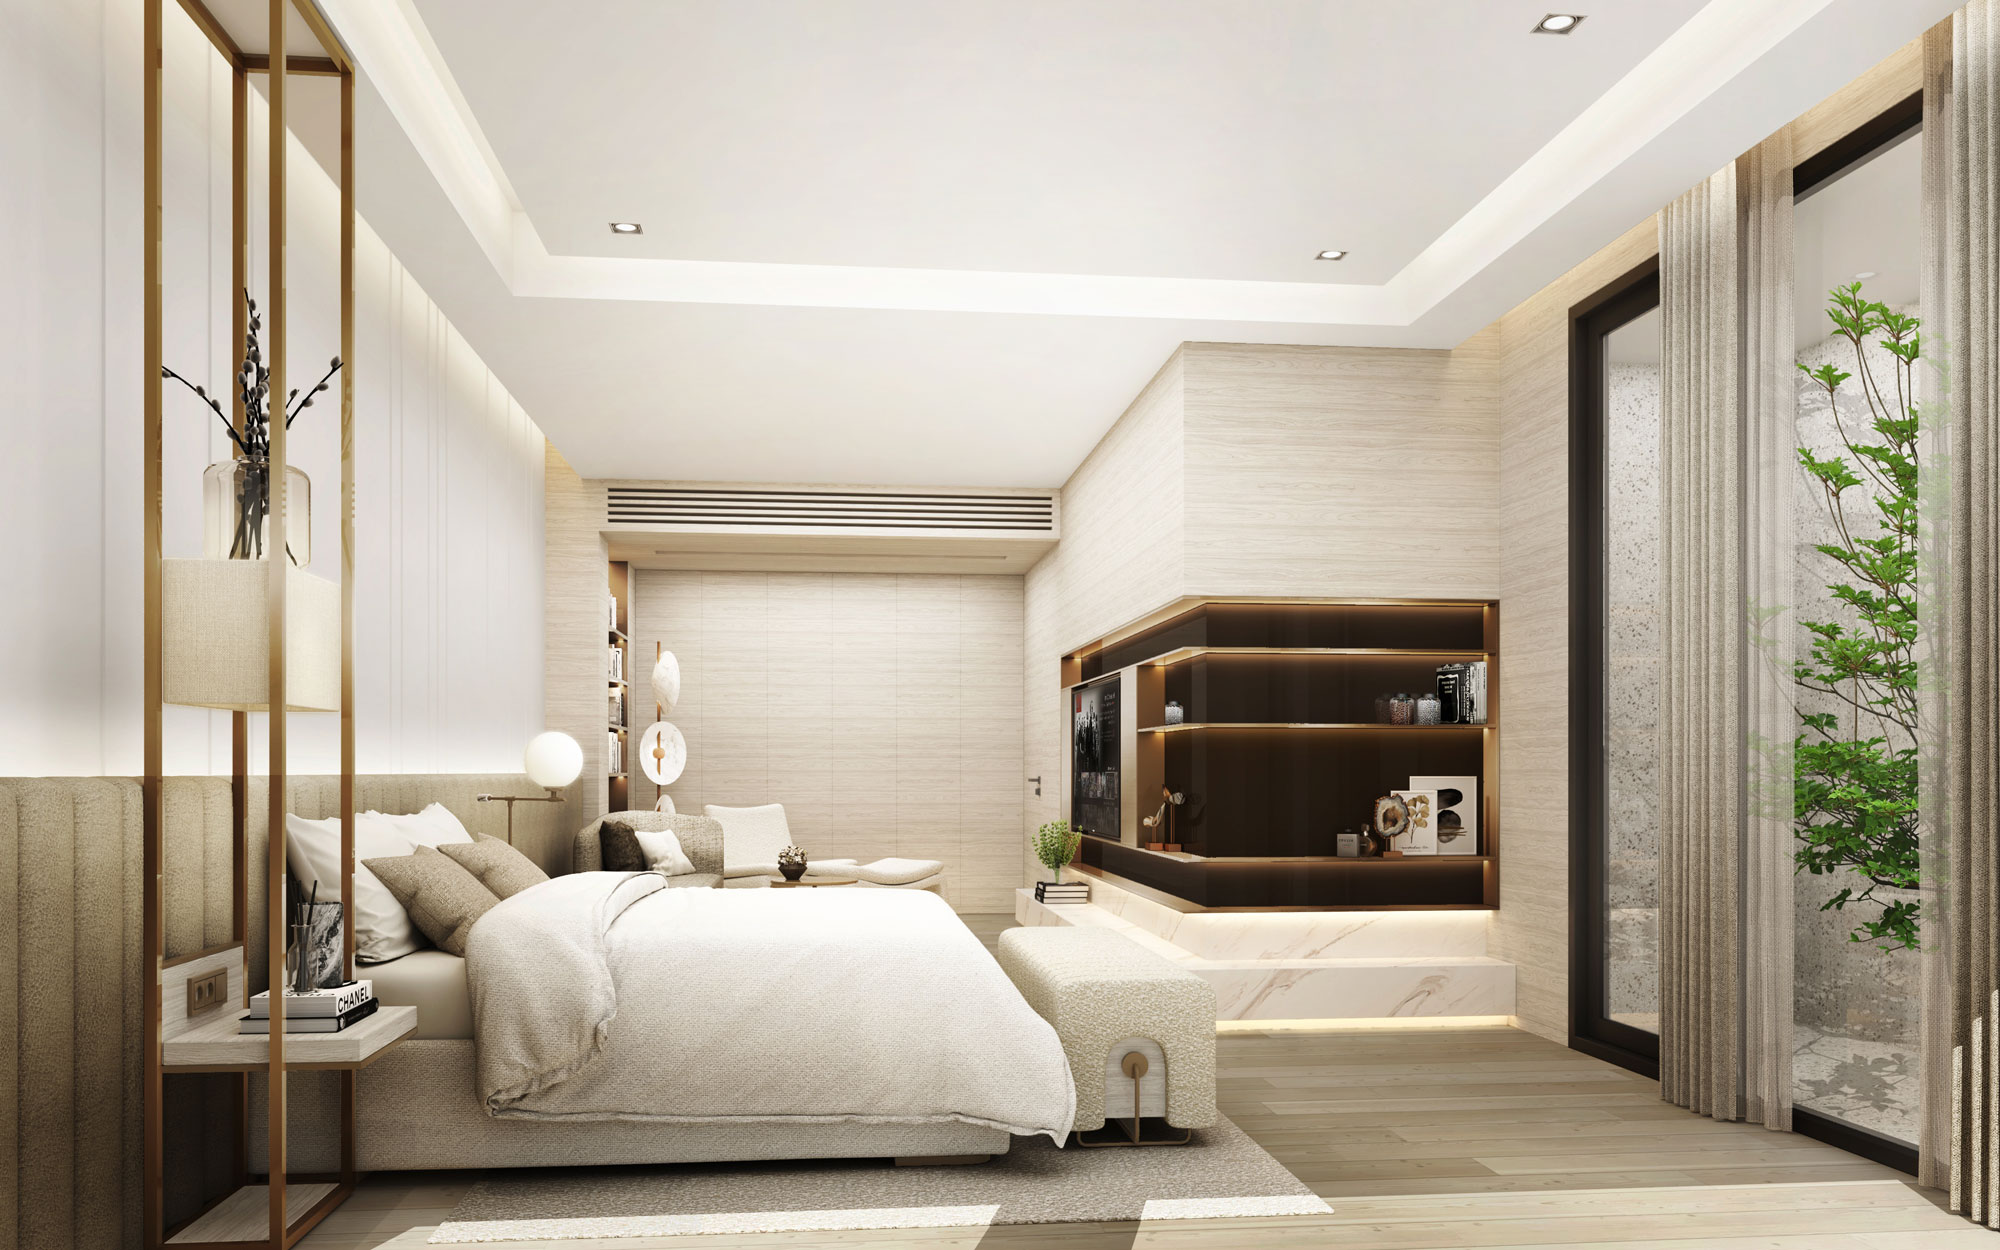 PENTHOUSE MASTER BEDROOMS